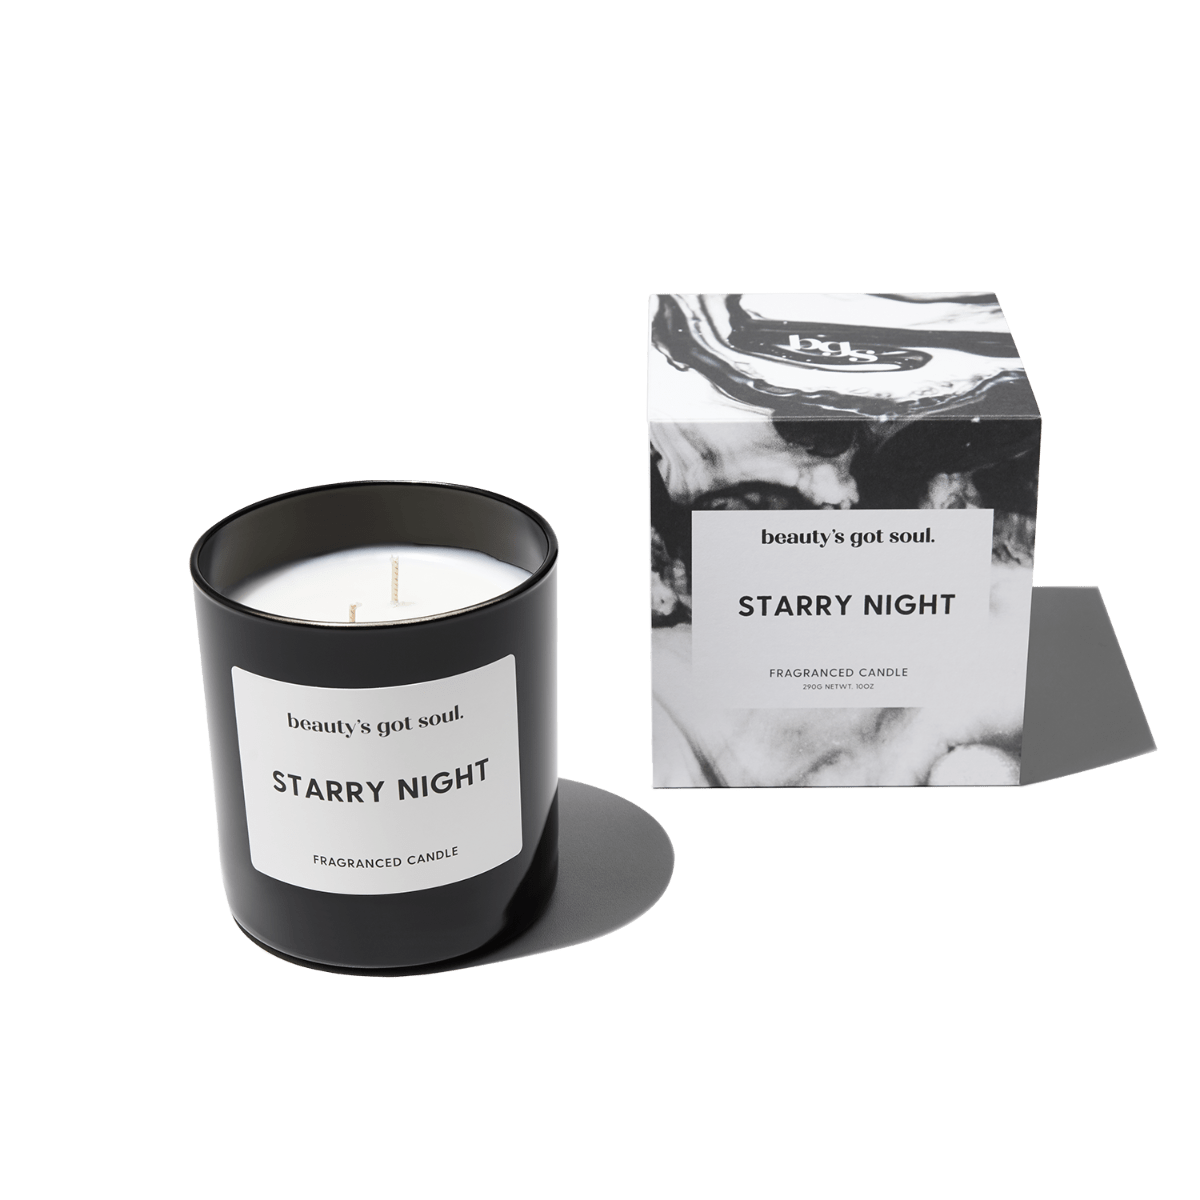 Starry Night Fragranced Candle 290g by Beautys Got Soul